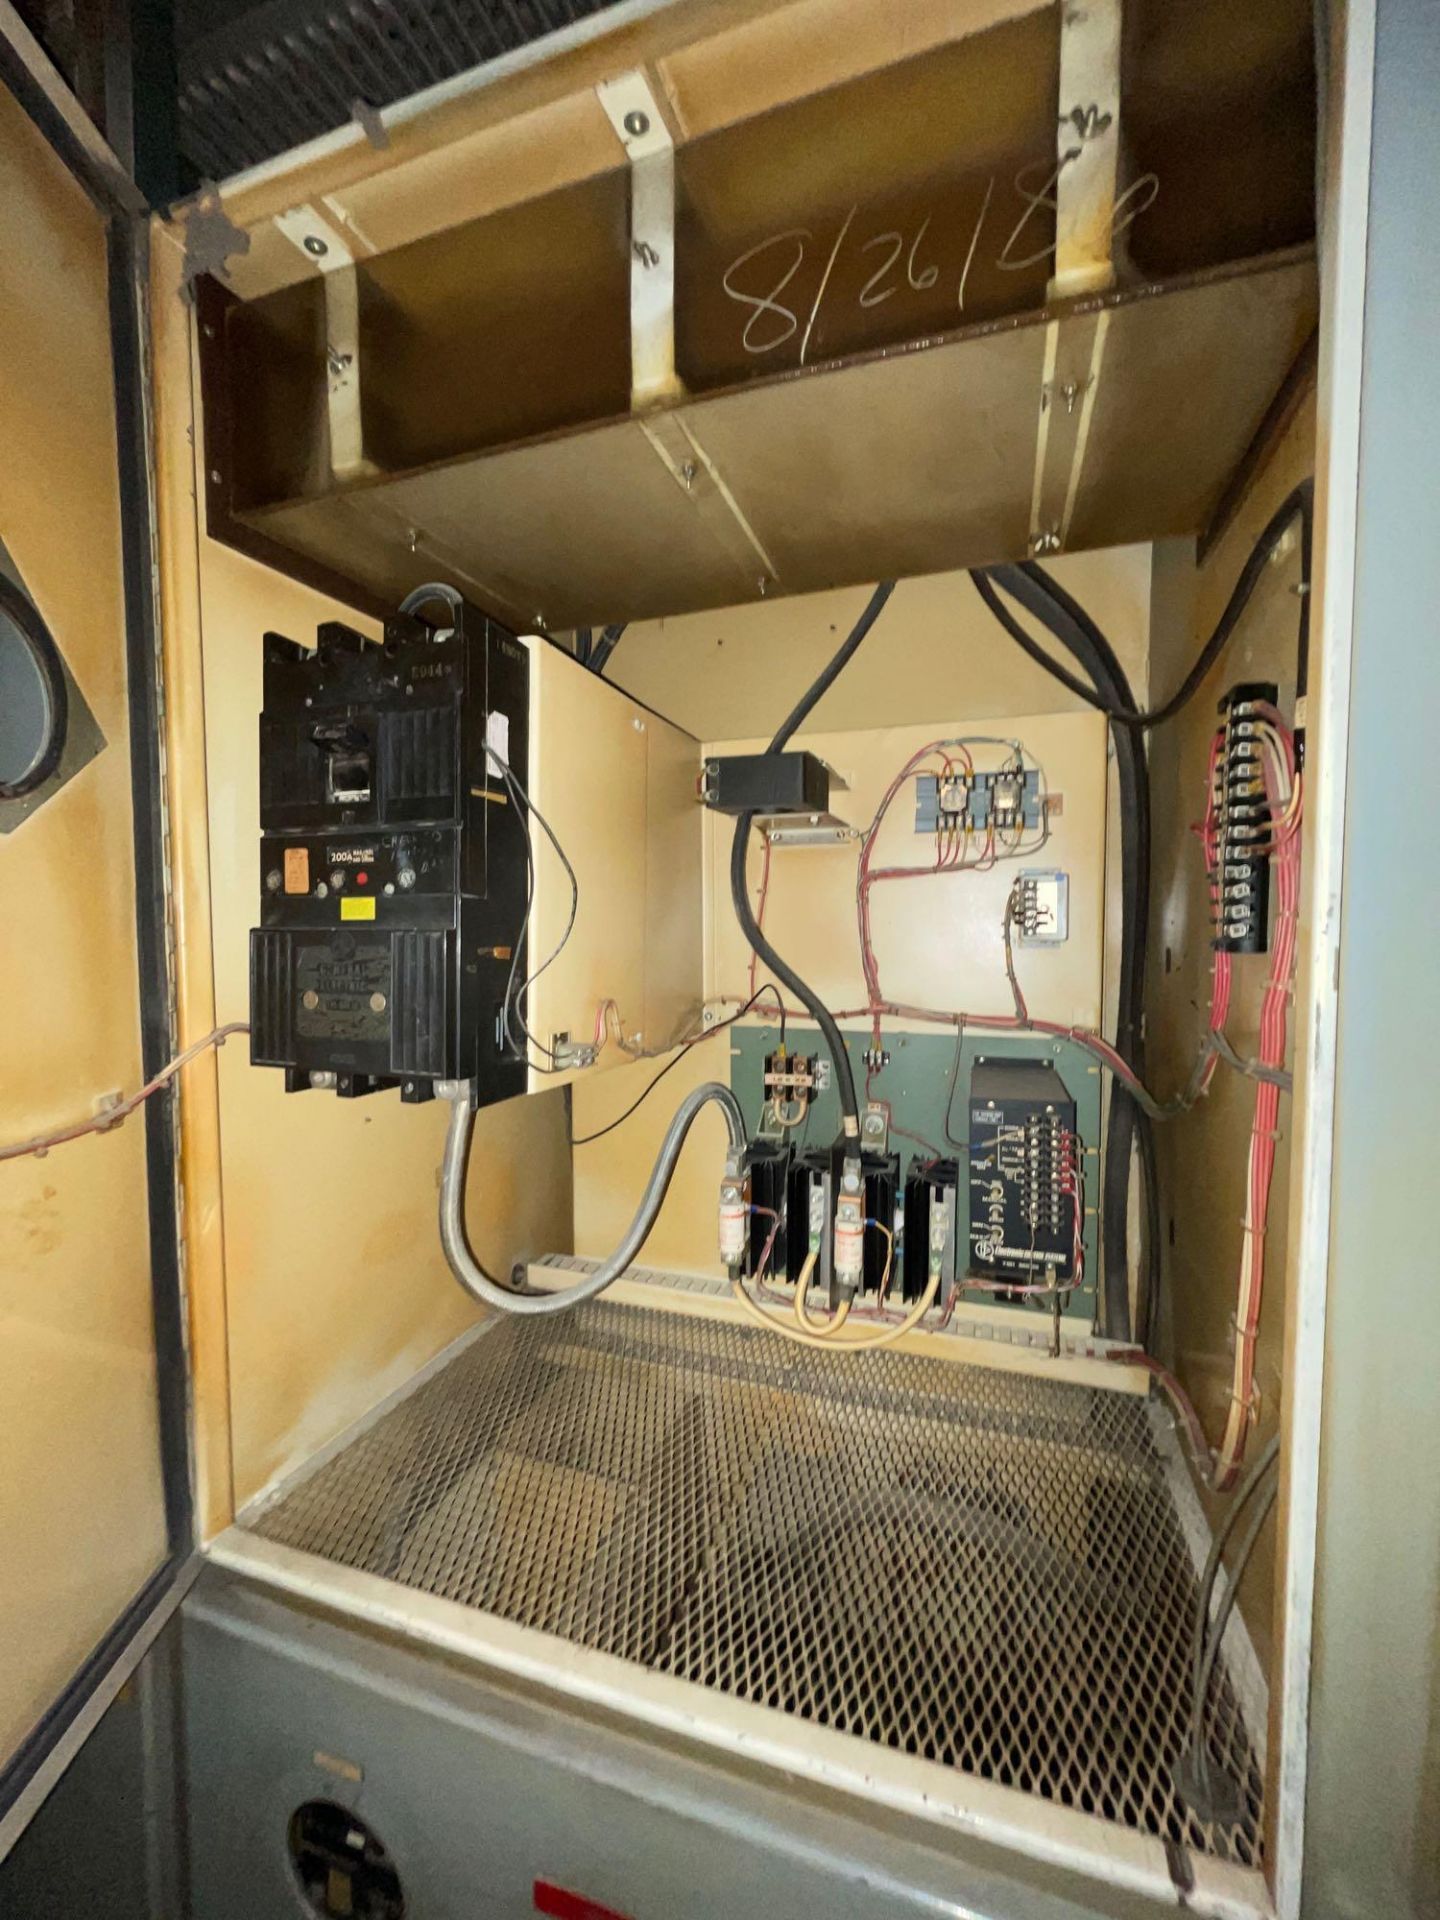 Glass Pane Bending Oven Furnace with Electrical Cabinets - Image 15 of 68